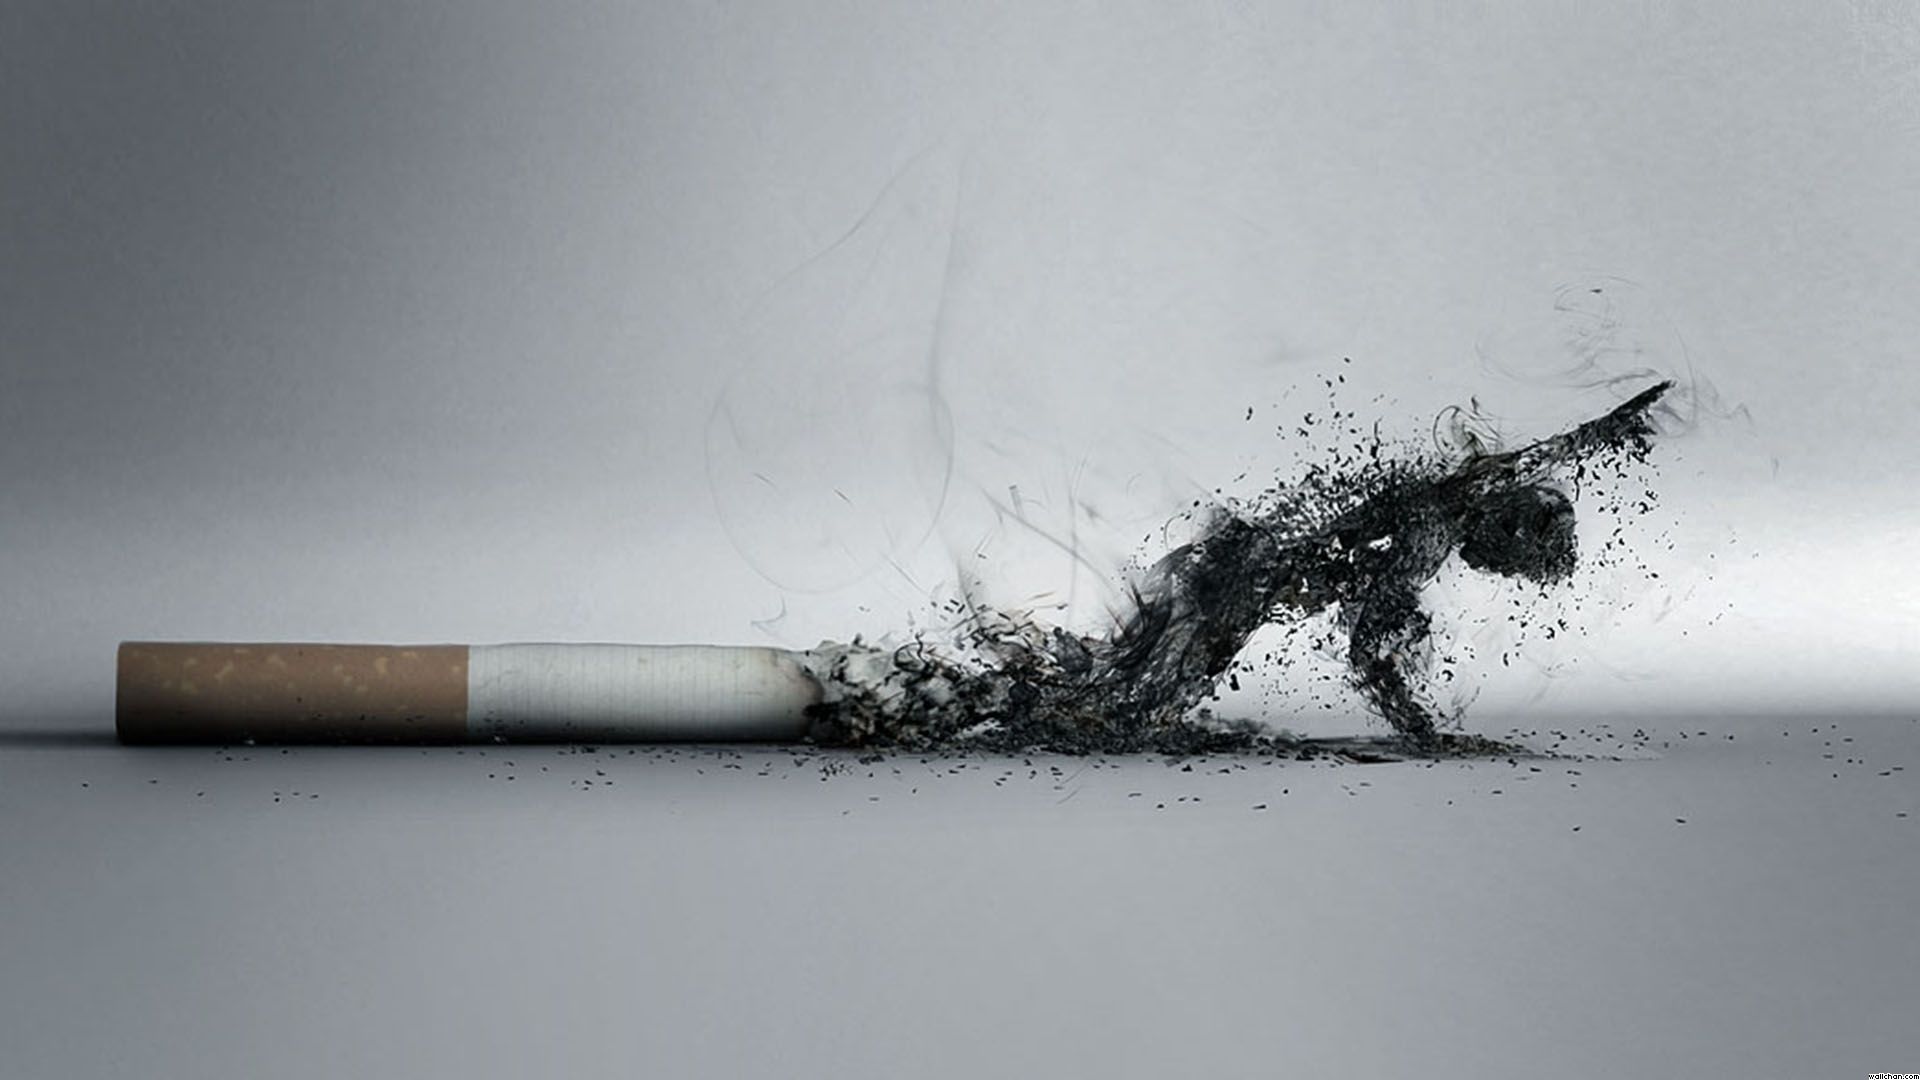 Smoking cigarettes has been linked to developing gray hair before the age of 30.